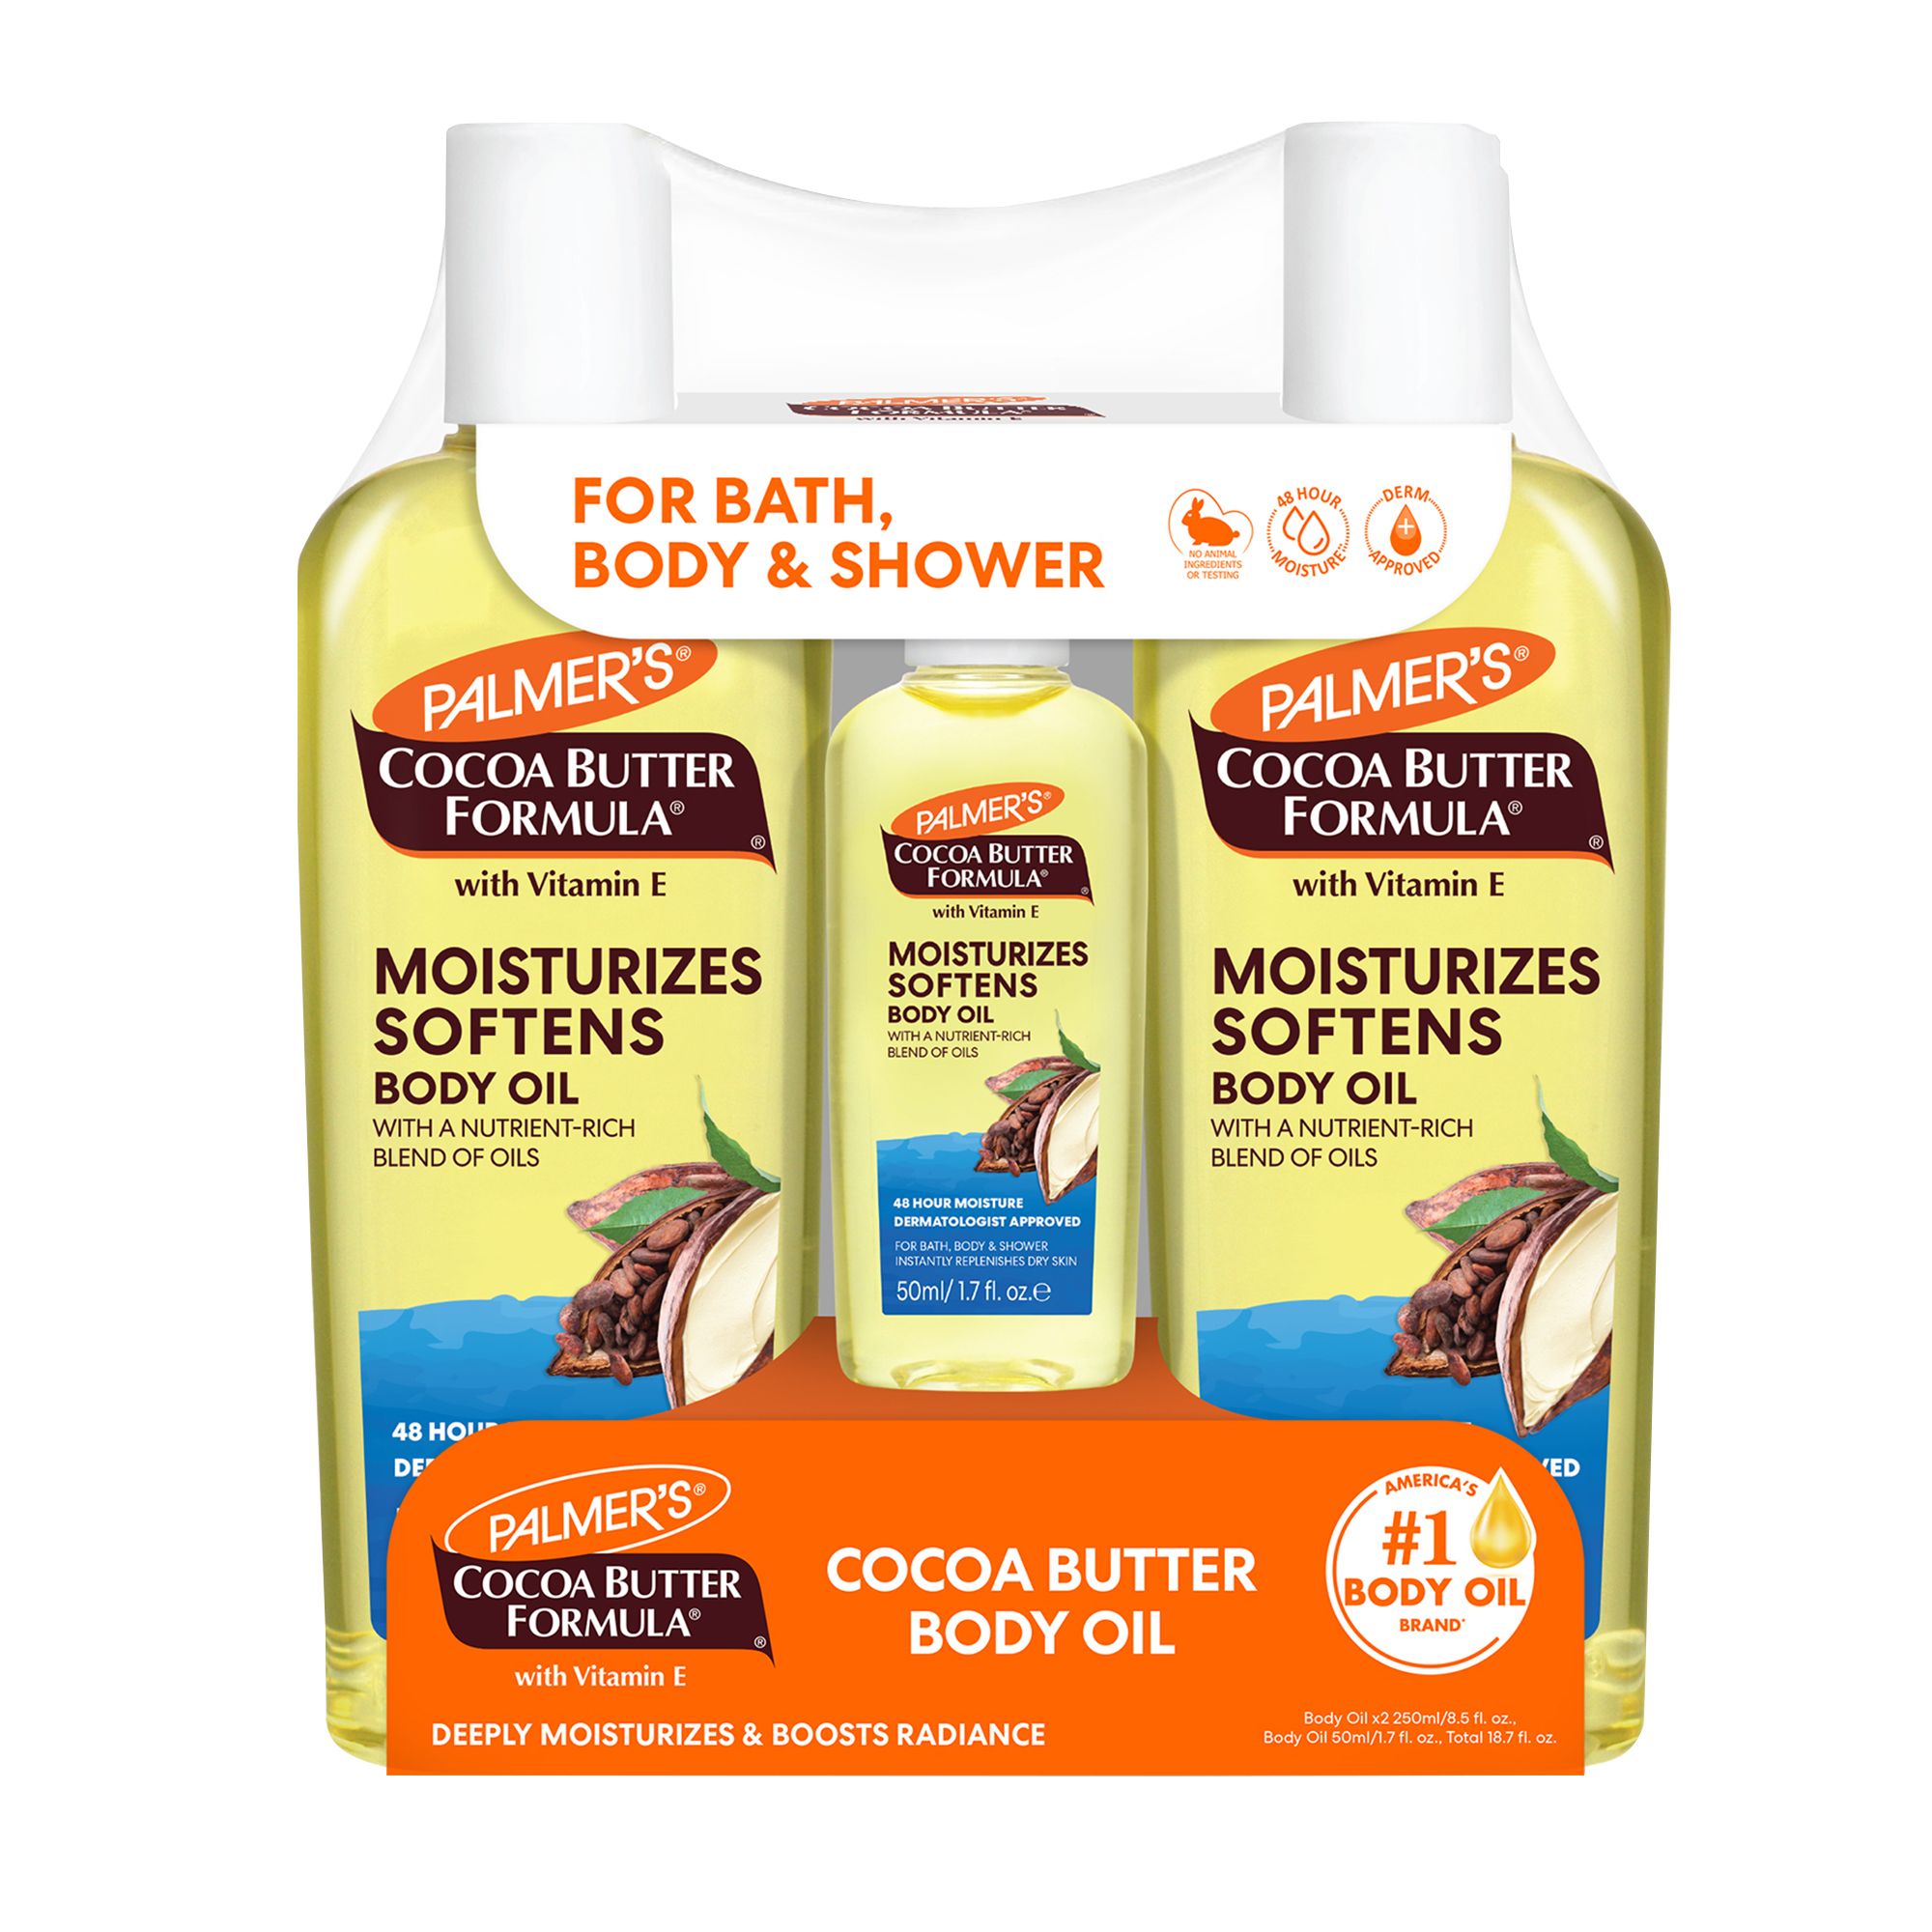 Palmer's Cocoa Butter Formula Body Oil Club Pack With Vitamin E, 2 ct./8.5 oz. Plus Travel Size Pack